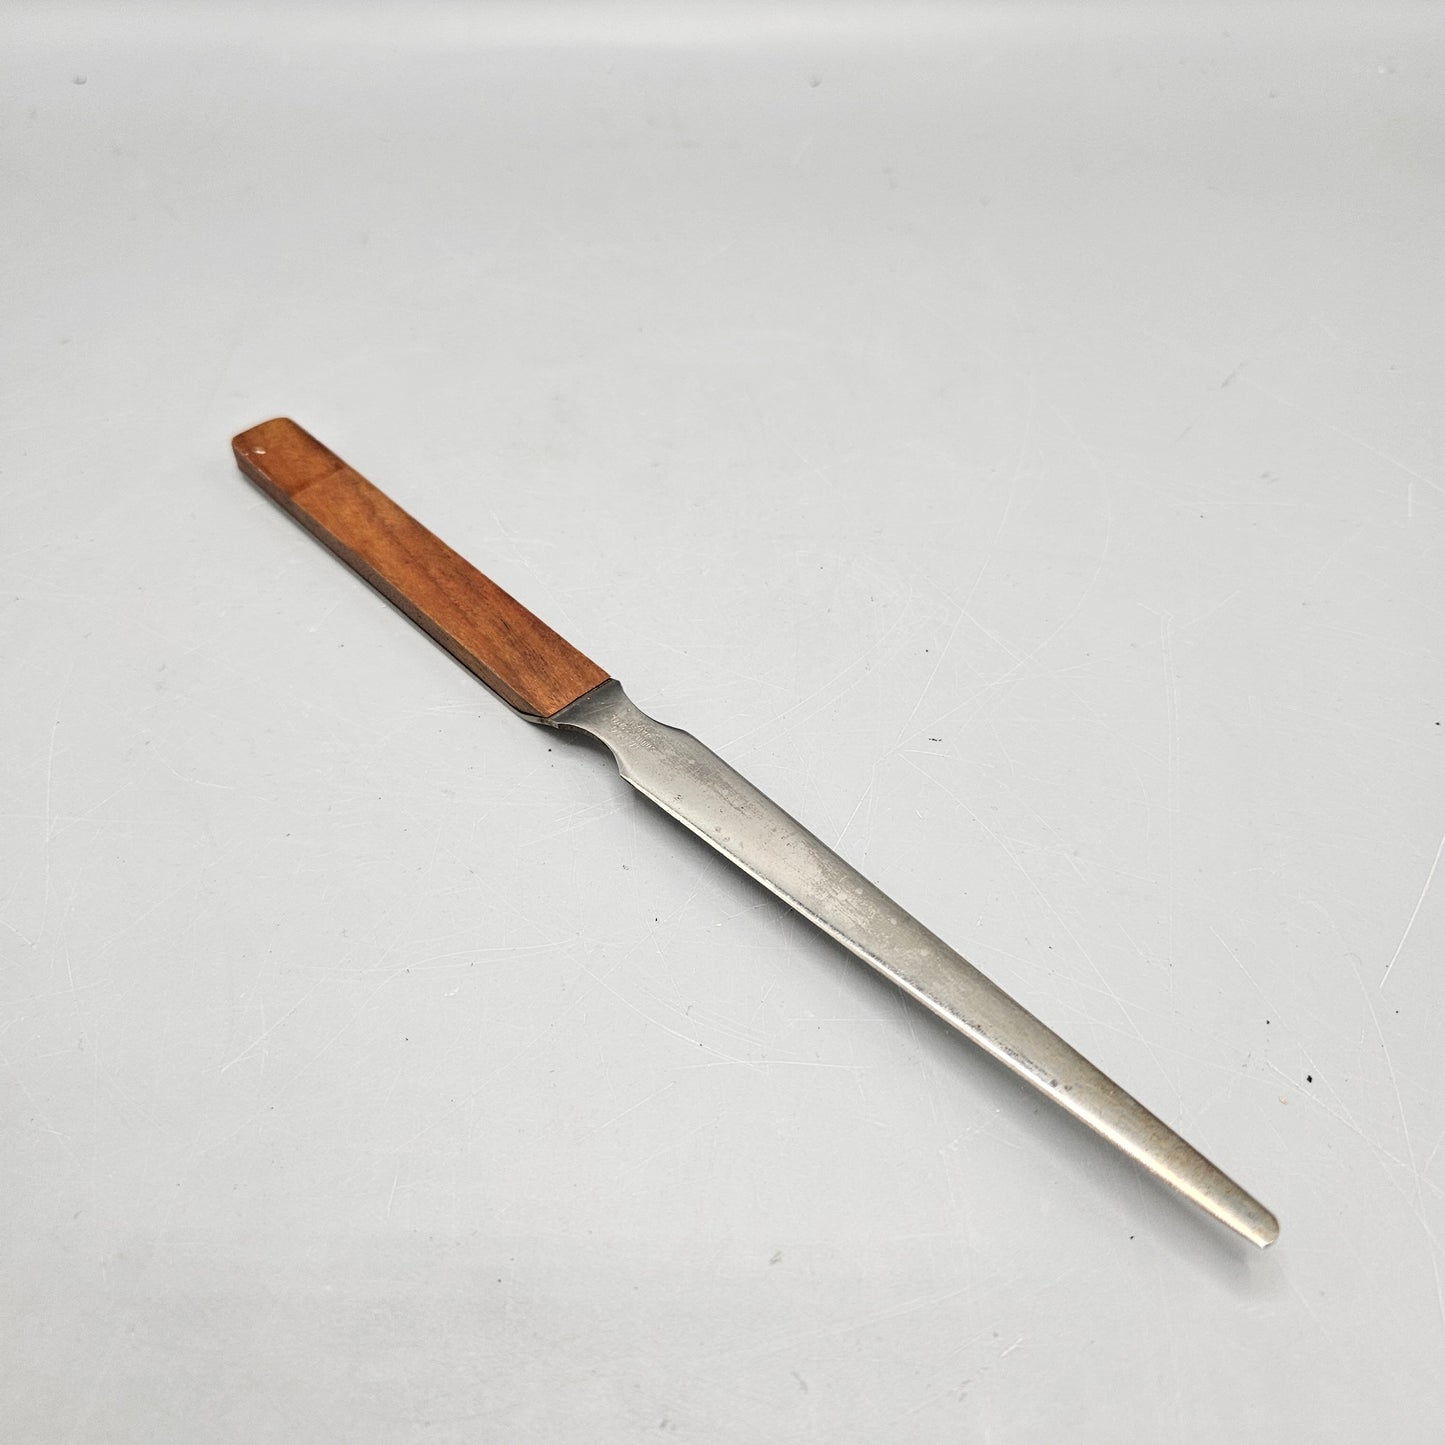 Vintage Letter Opener - Independent's Service Company Hannibal, MO - Corinth, Miss